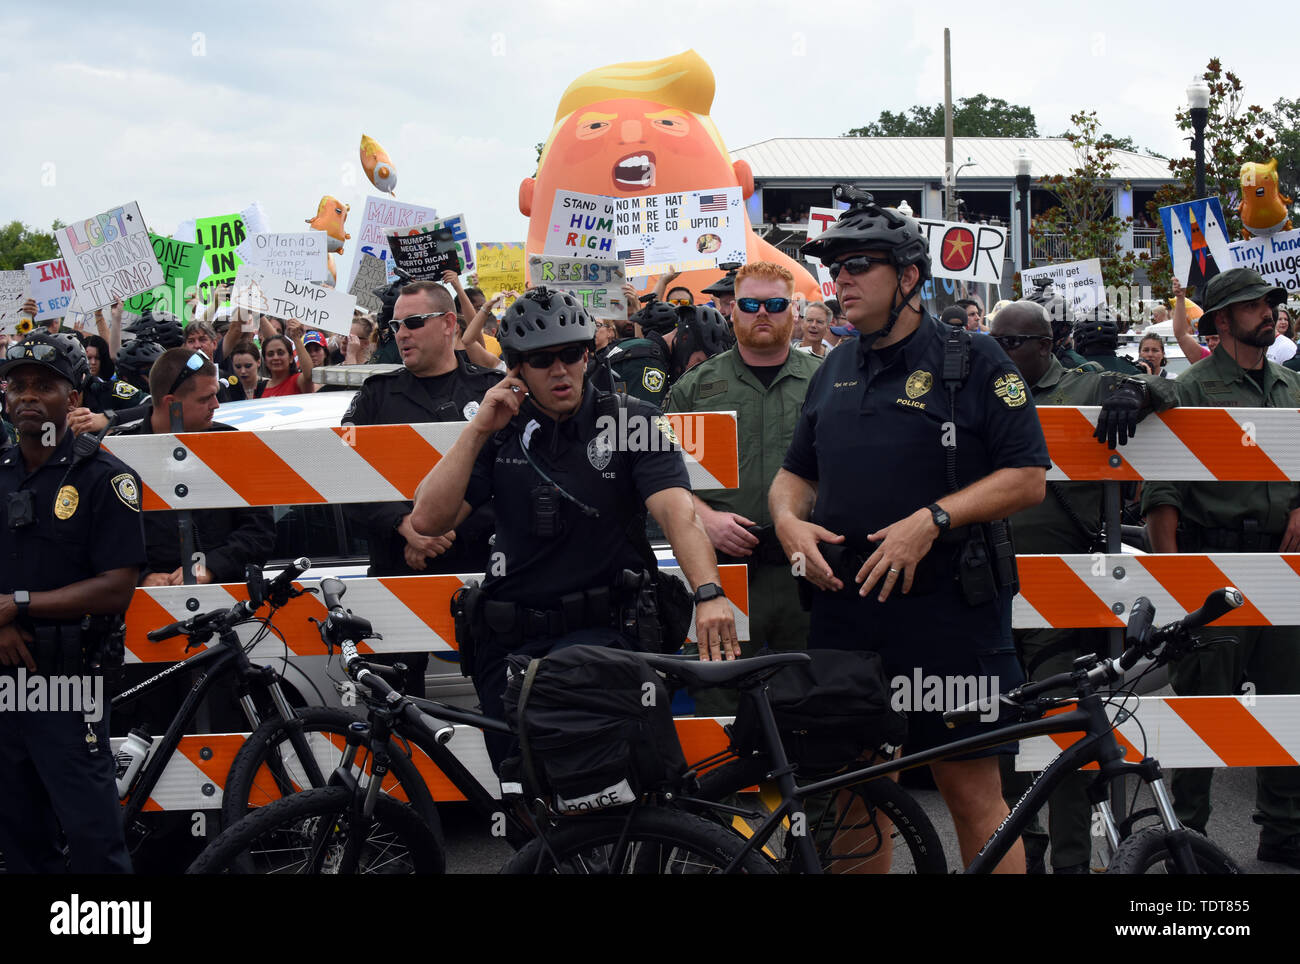 Orlando, Florida, USA. 18th June, 2019. Police separate Trump supporters and Trump protesters near the site of a Make America Great Again rally at the Amway Center on June 18, 2019 in Orlando, Florida. The rally is billed as U.S. President Donald Trump's kick-off event for his campaign for re-election in 2020. Credit: Paul Hennessy/Alamy Live News Stock Photo